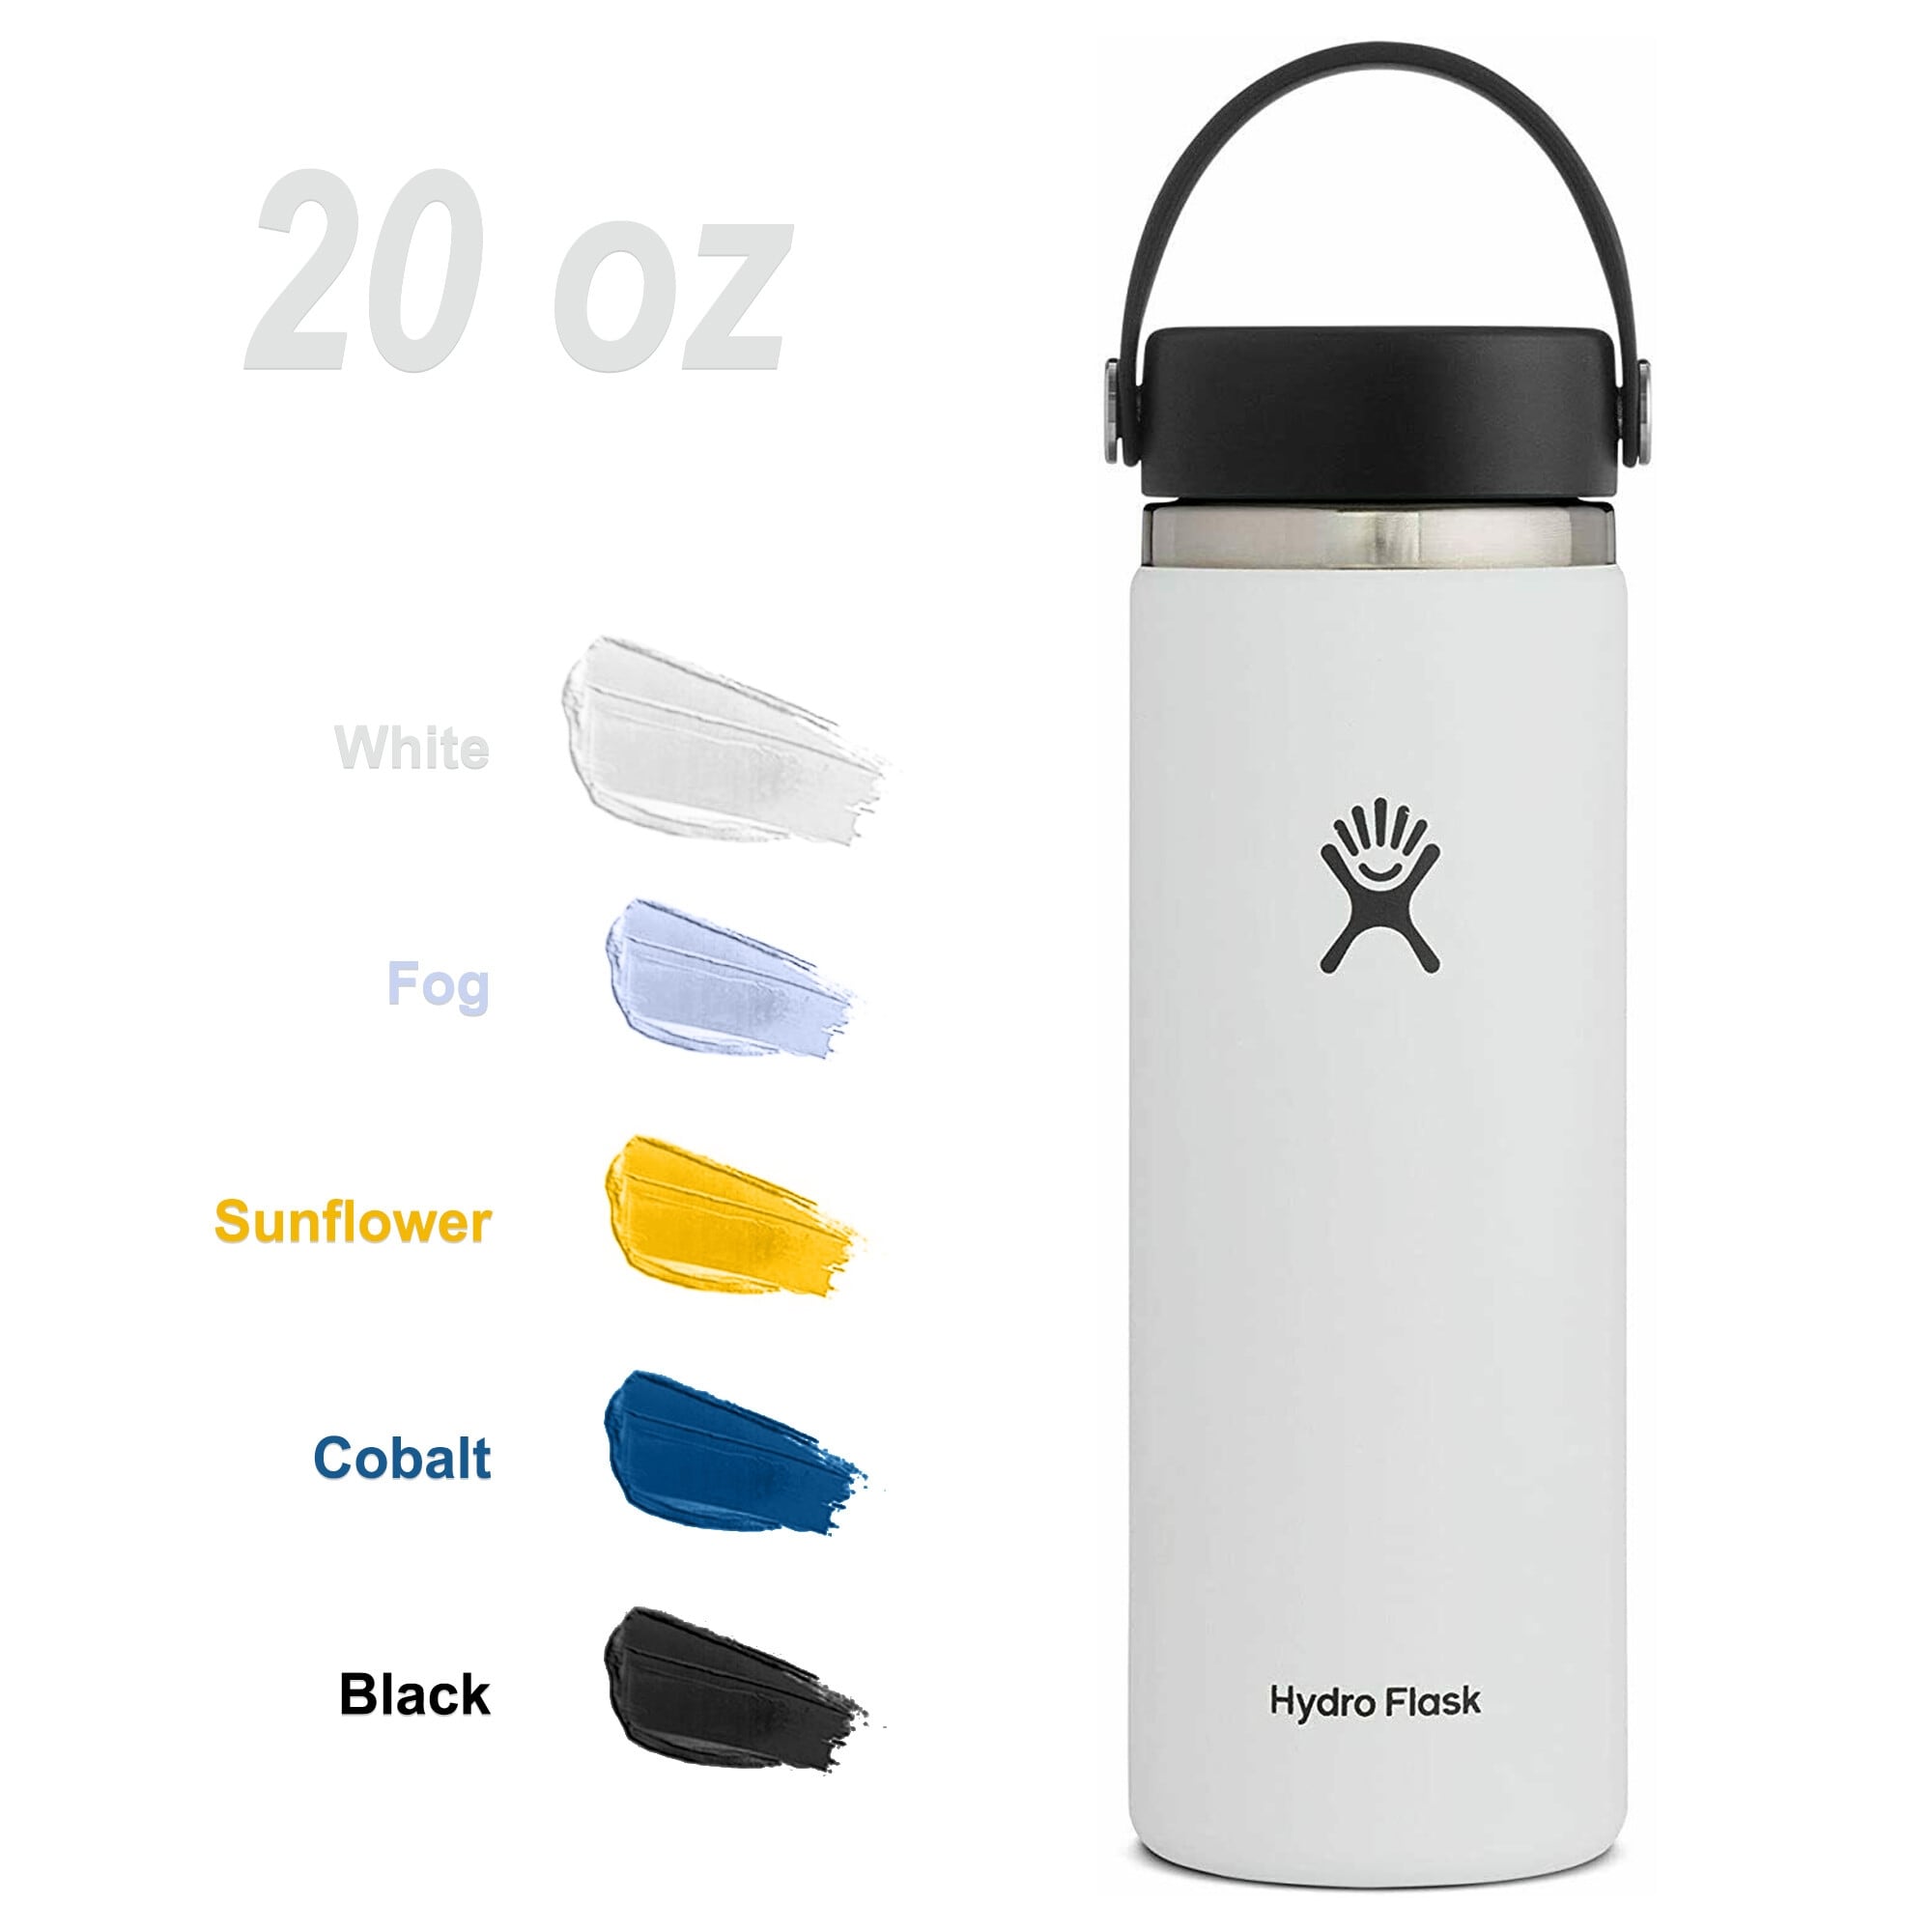 https://ak1.ostkcdn.com/images/products/is/images/direct/9660ba30735519dcf16bb0f5872cba9d35778d38/Hydro-Flask-20oz-Wide-Mouth-Water-Bottle-with-Flex-Sip-Lid.jpg